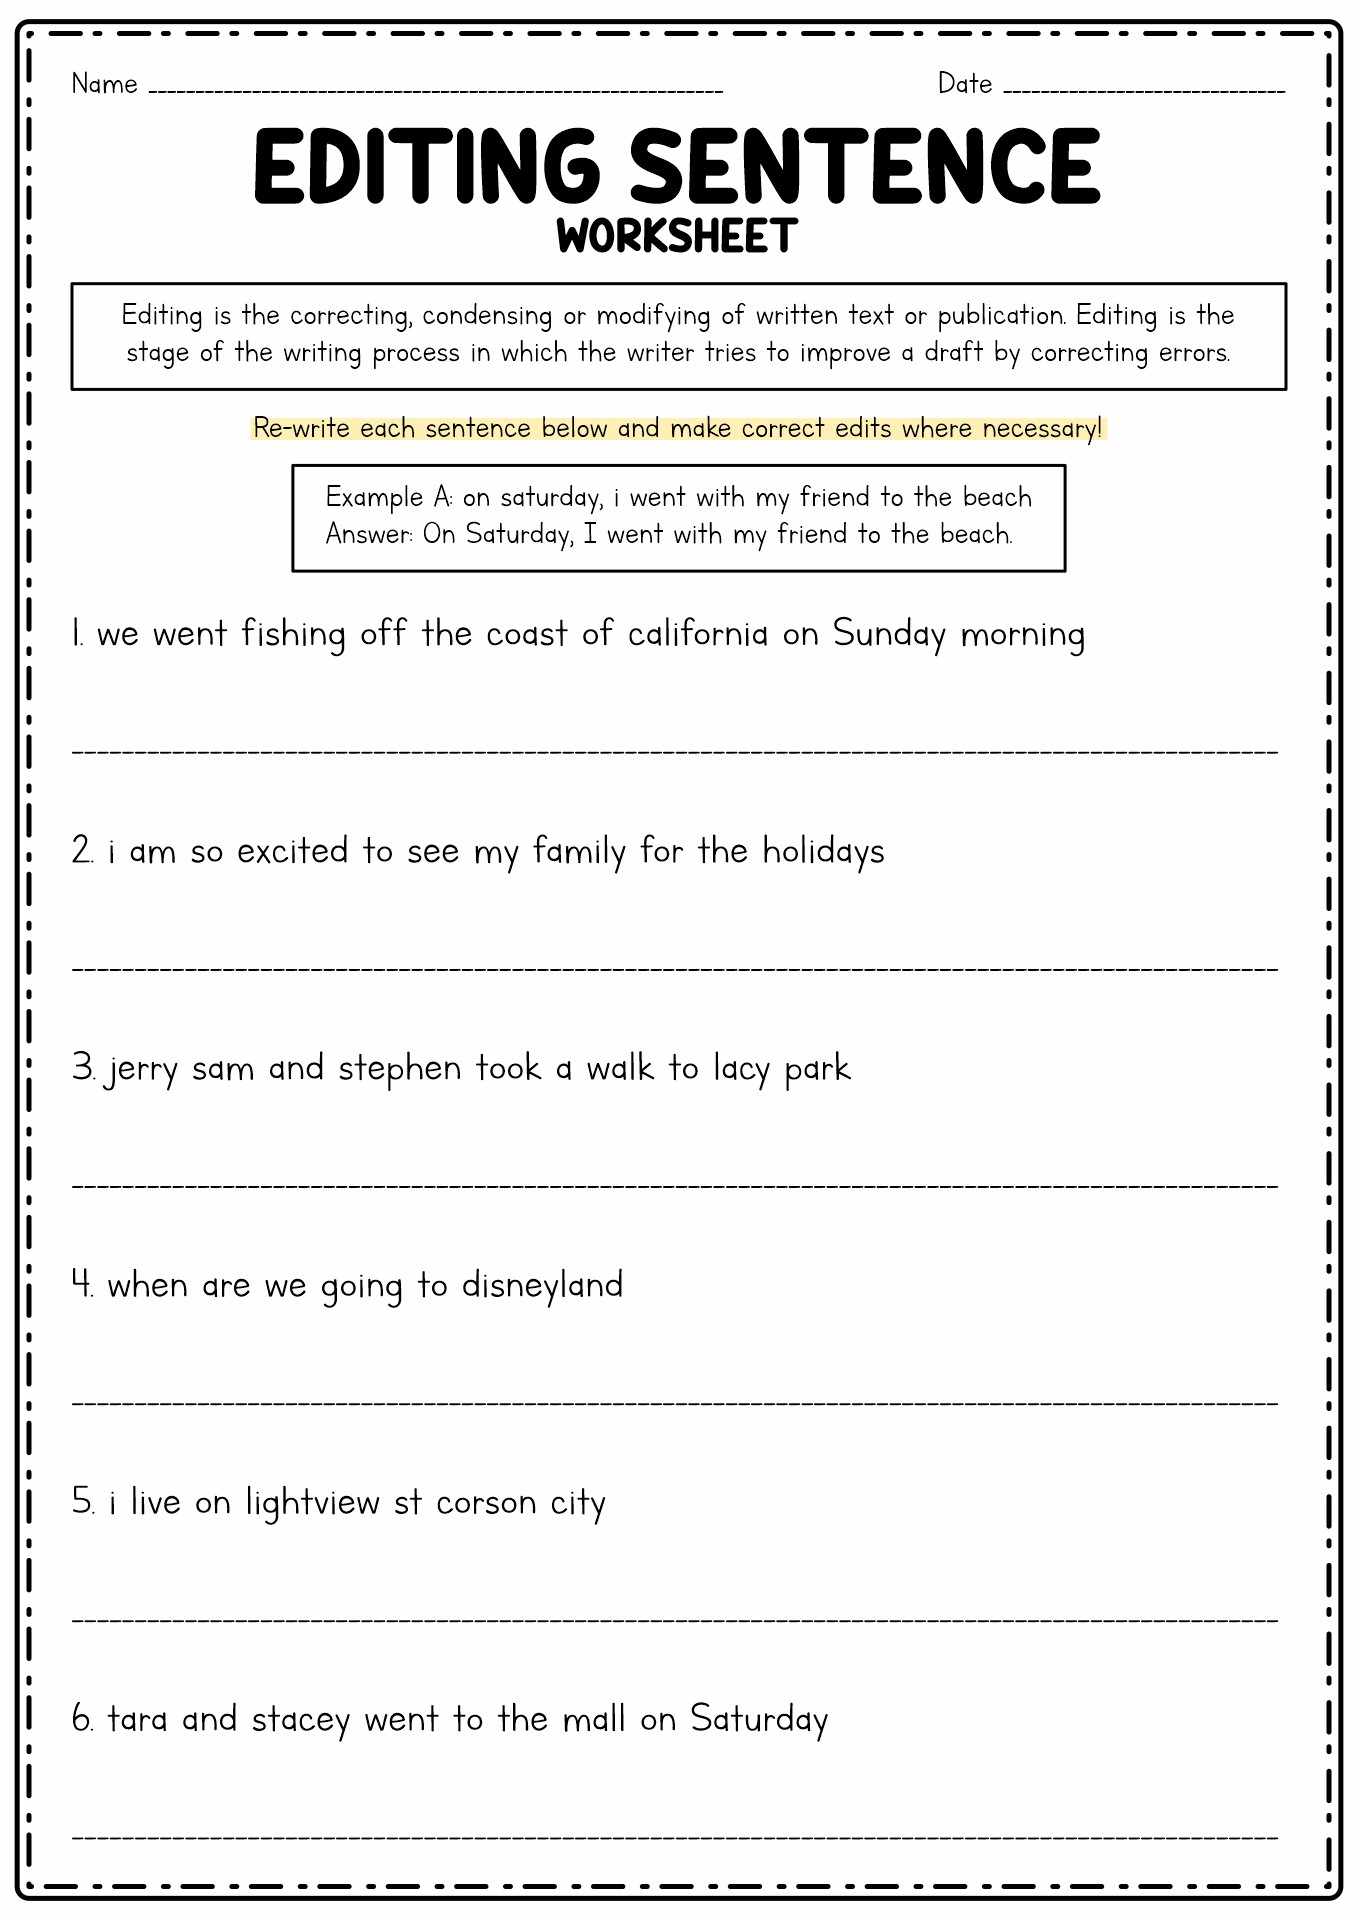 18 Best Images of 4th Grade Essay Writing Worksheets - Free Creative